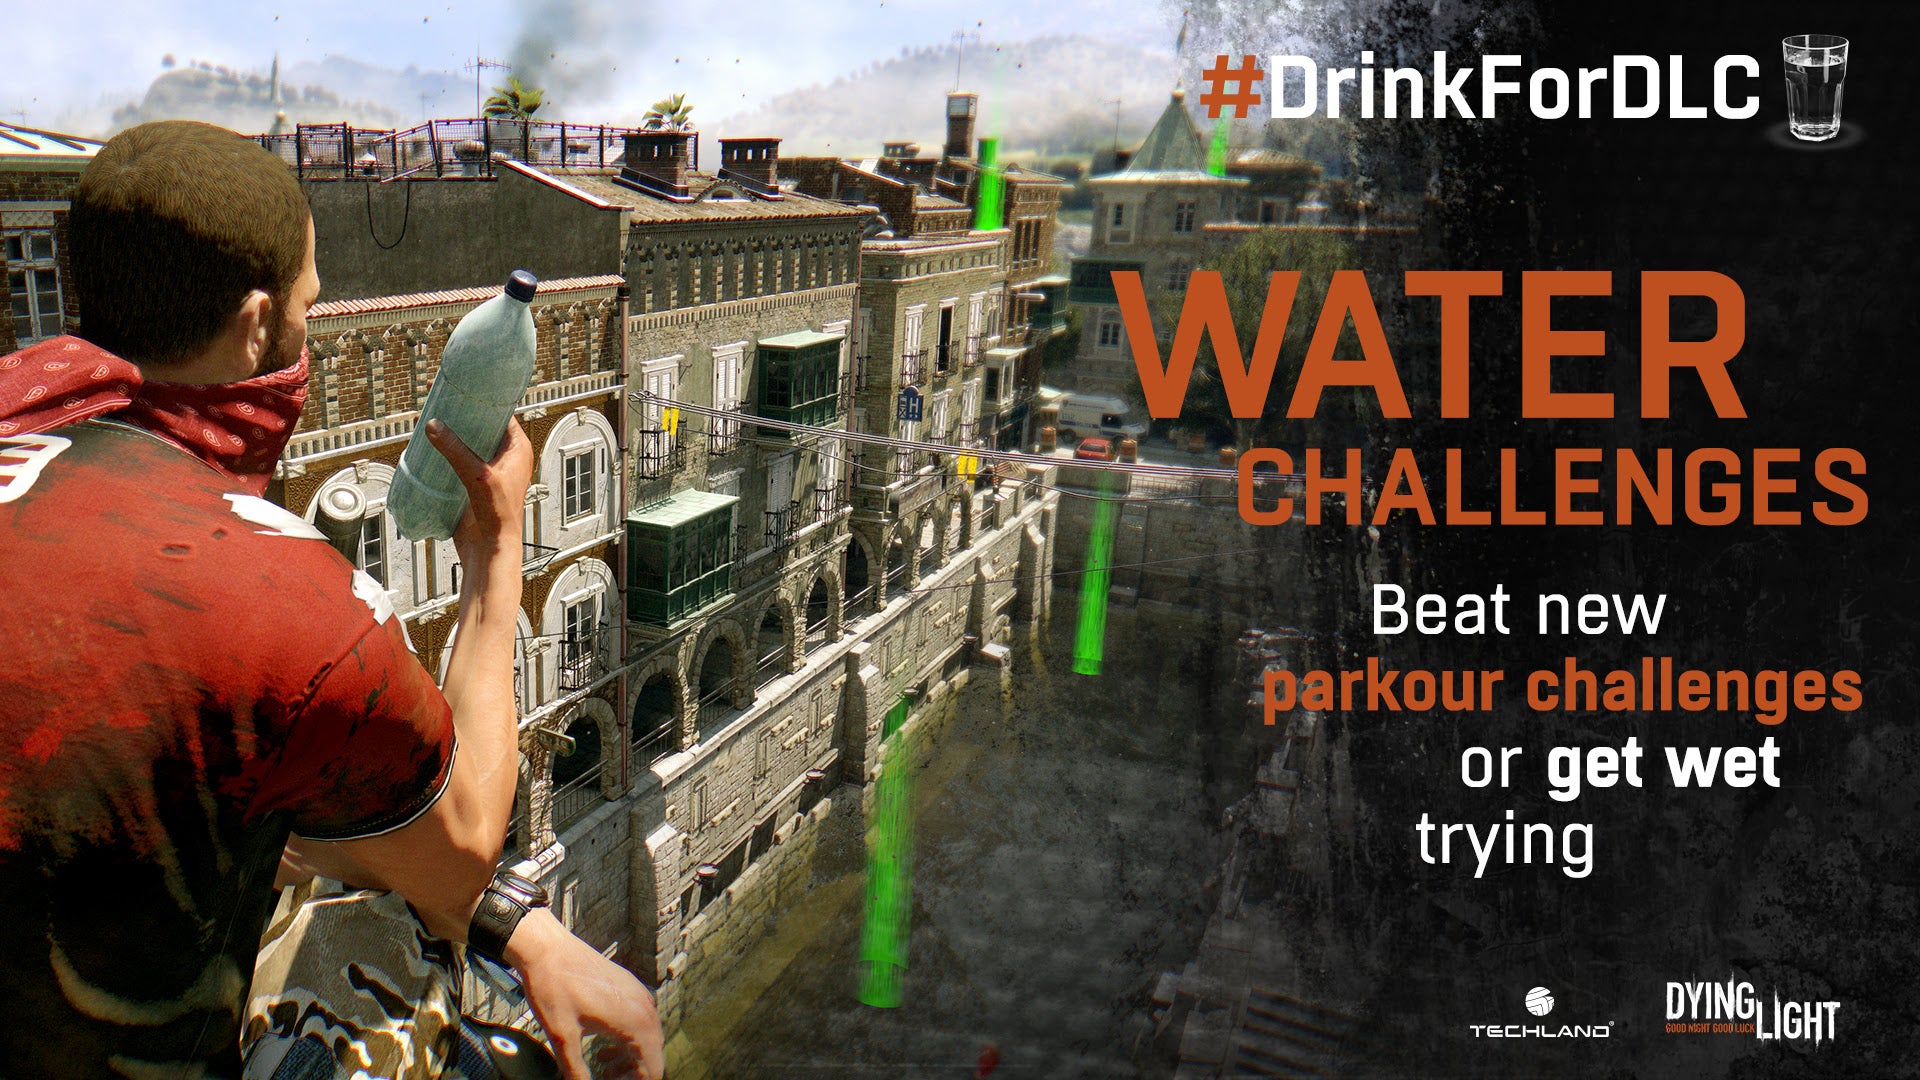 Image for Dying Light's free Destiny-spoofing #DrinkForDLC content revealed